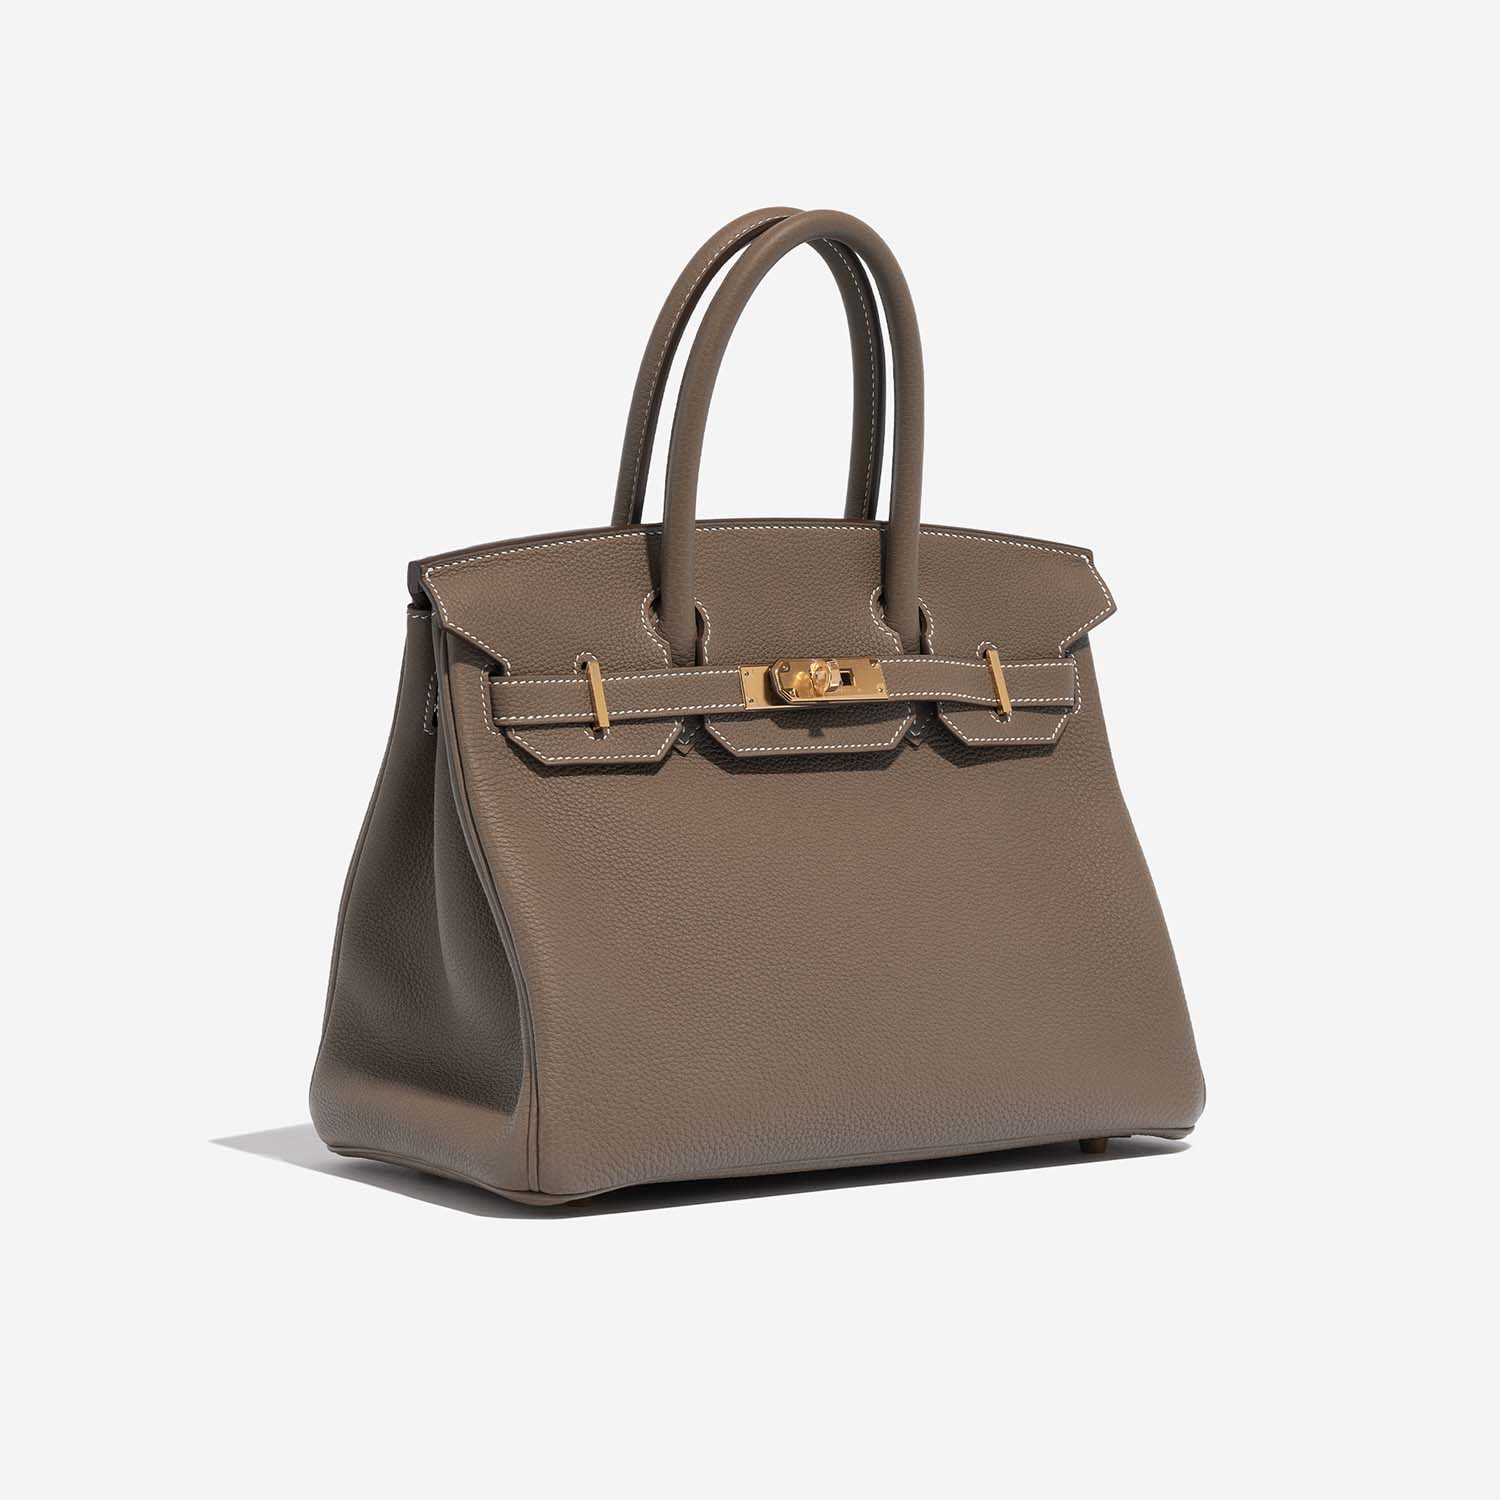 Hermes Birkin 30 in Evercolor Leather Etoupe available now! #birkin #l